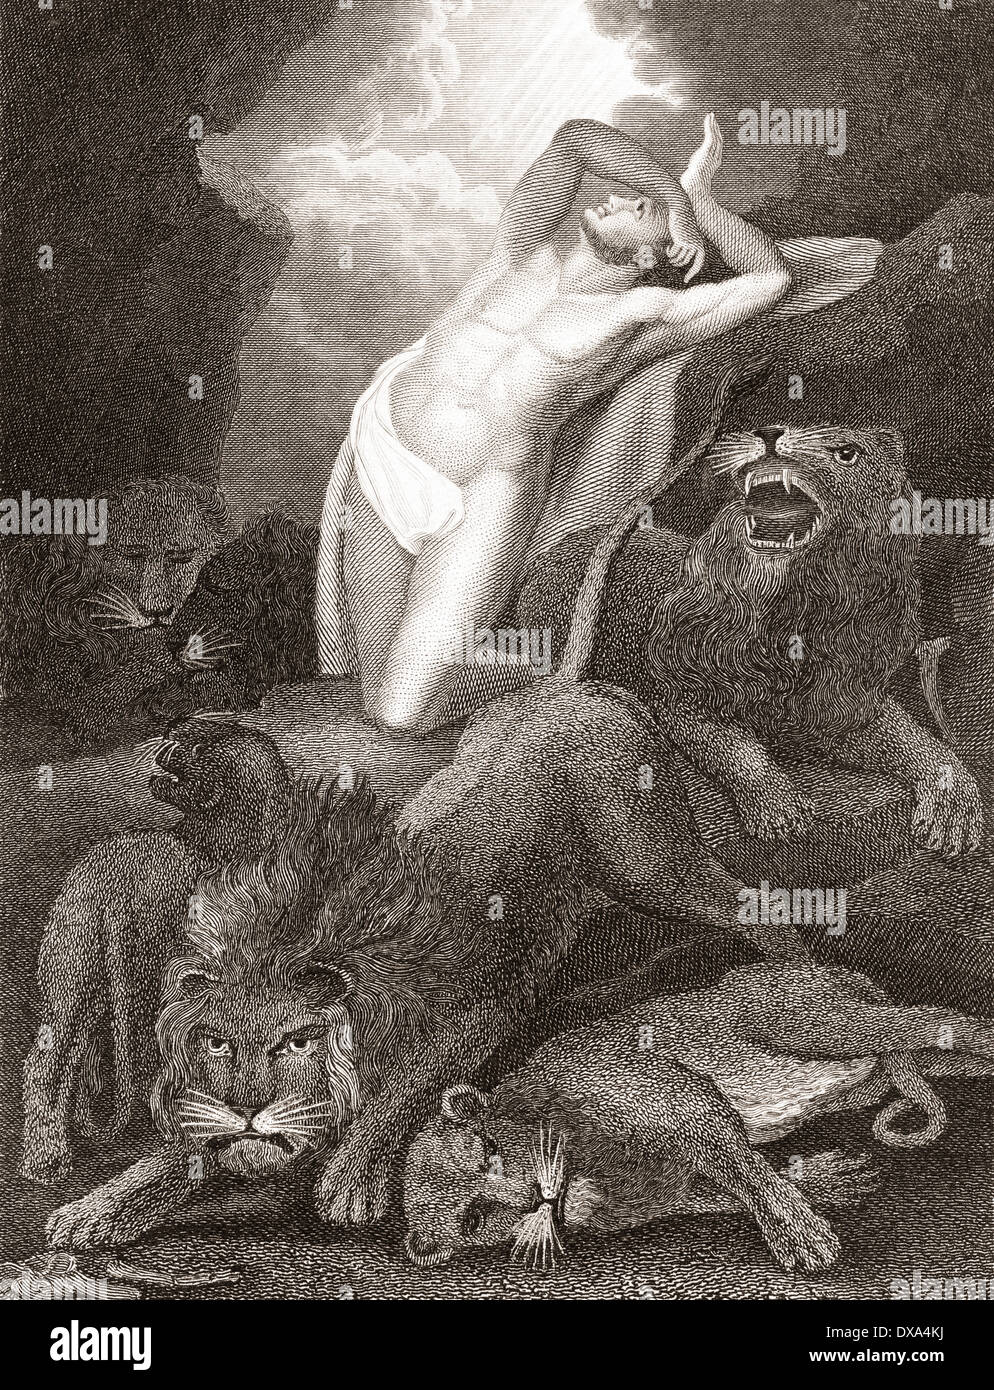 Daniel in the lion's den. From a 19th century print. Stock Photo